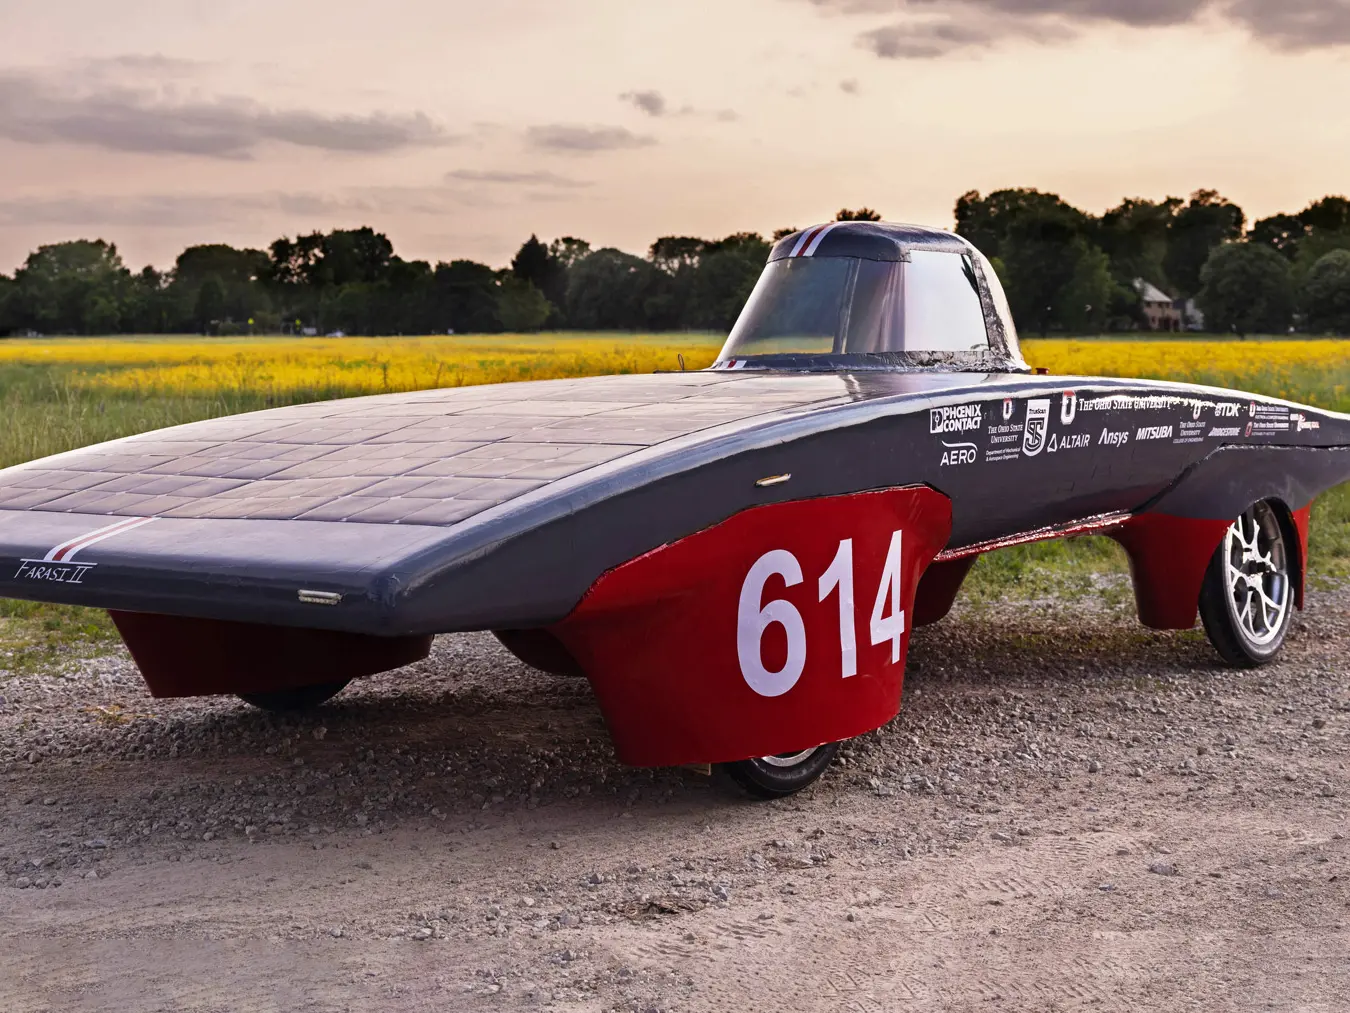 The Ohio State team’s solar car is scarlet and gray. There’s a one-person cockpit and the main body is softly arch-shaped, coated in solar panels and surprisingly shallow. A large 614 is emblazoned on the wheel cover closest to the camera. The car sits in front of a field during a sunset. 